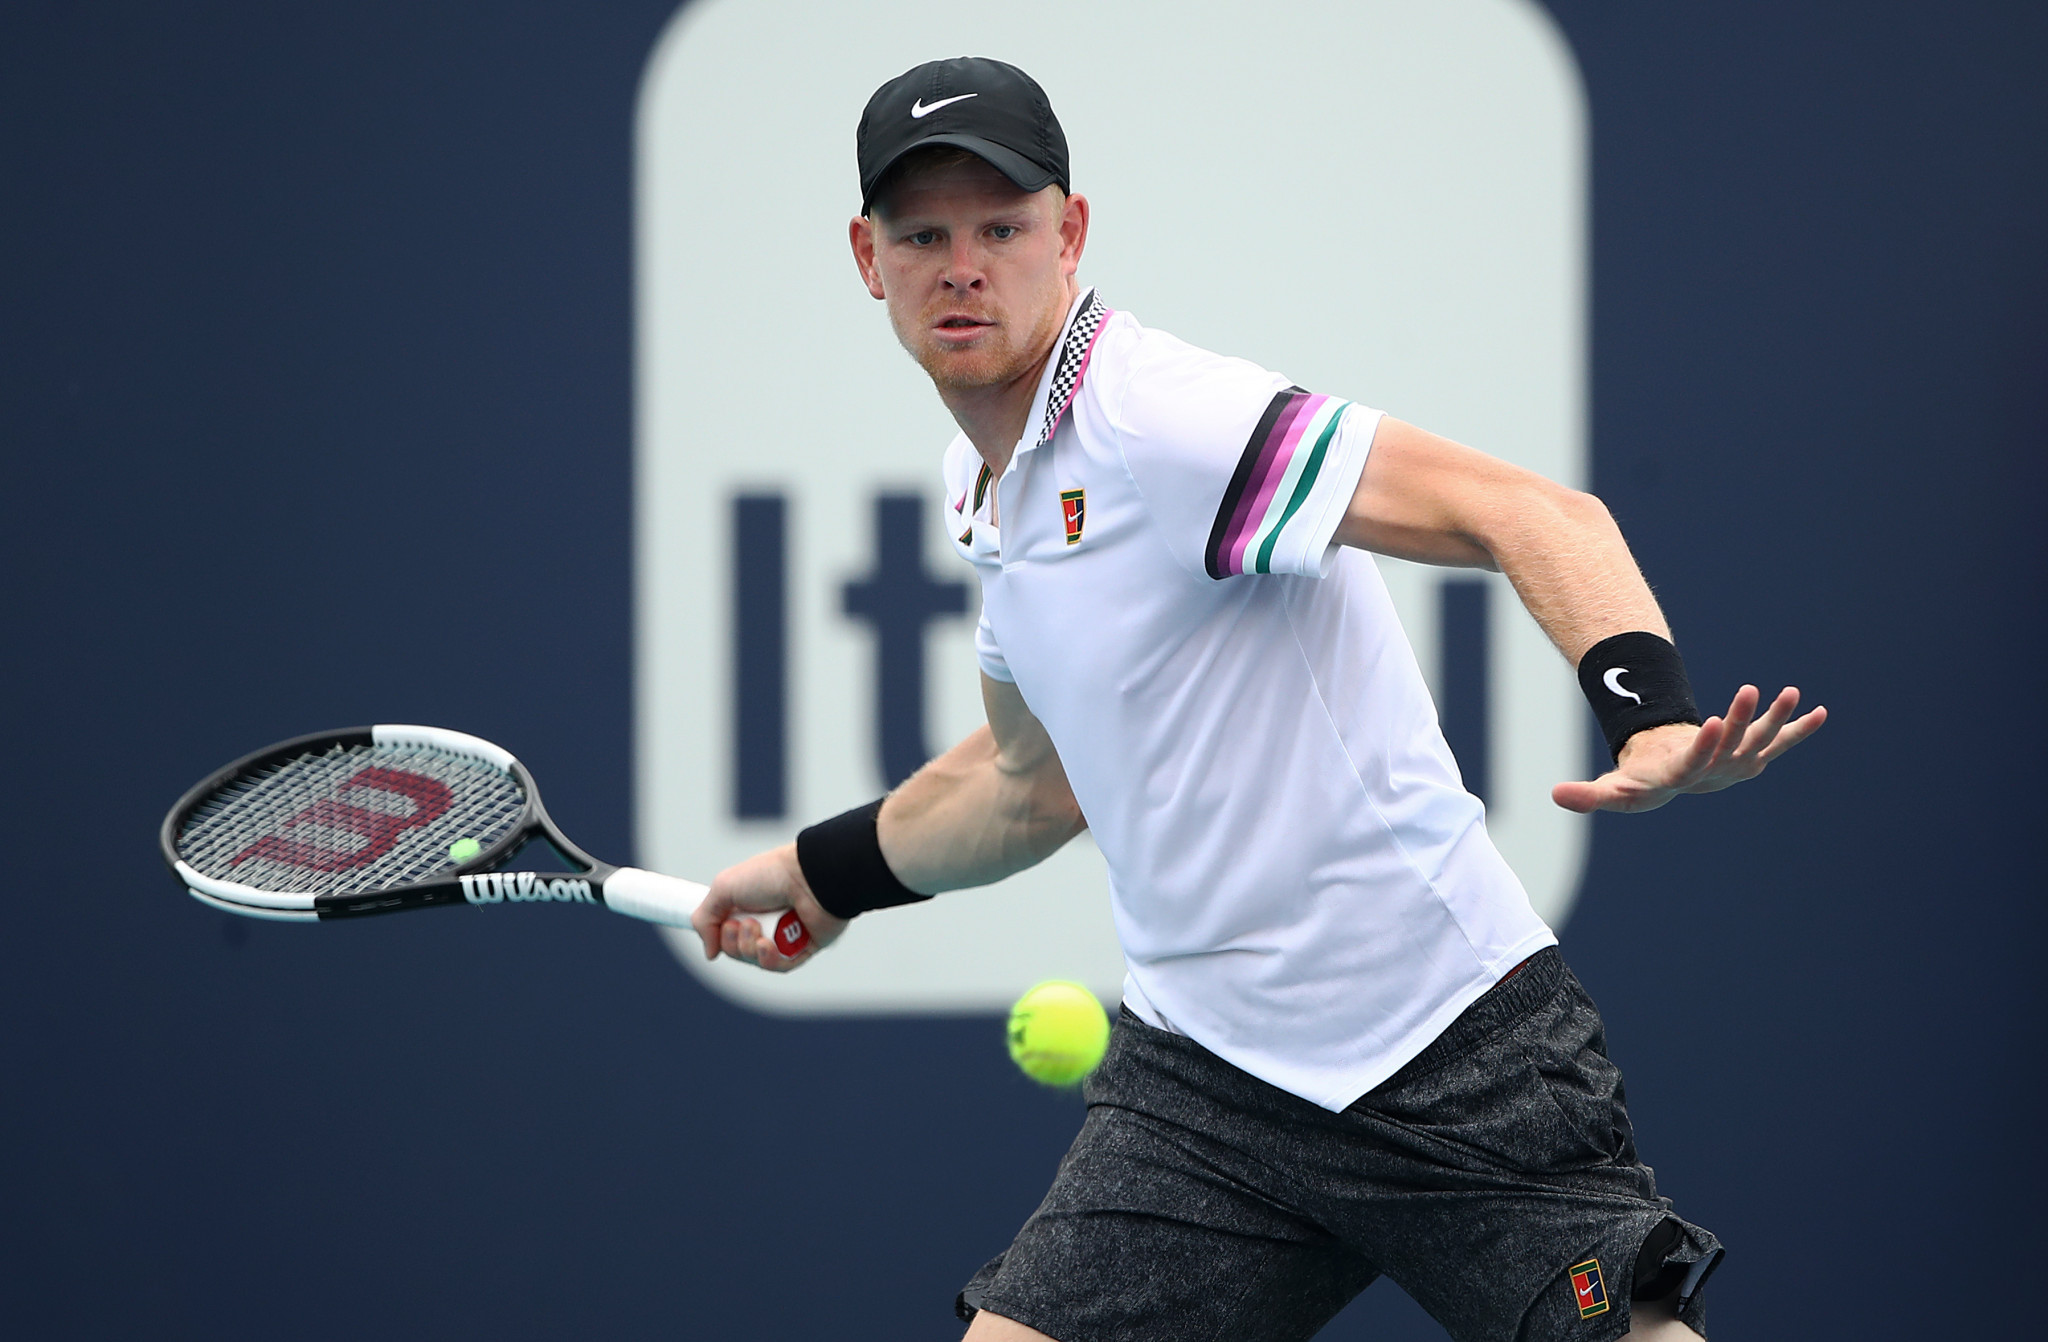 Britain's Kyle Edmund is set to face defending champion, America's John Isner, in the last 16 of the Miami Open ©Getty Images